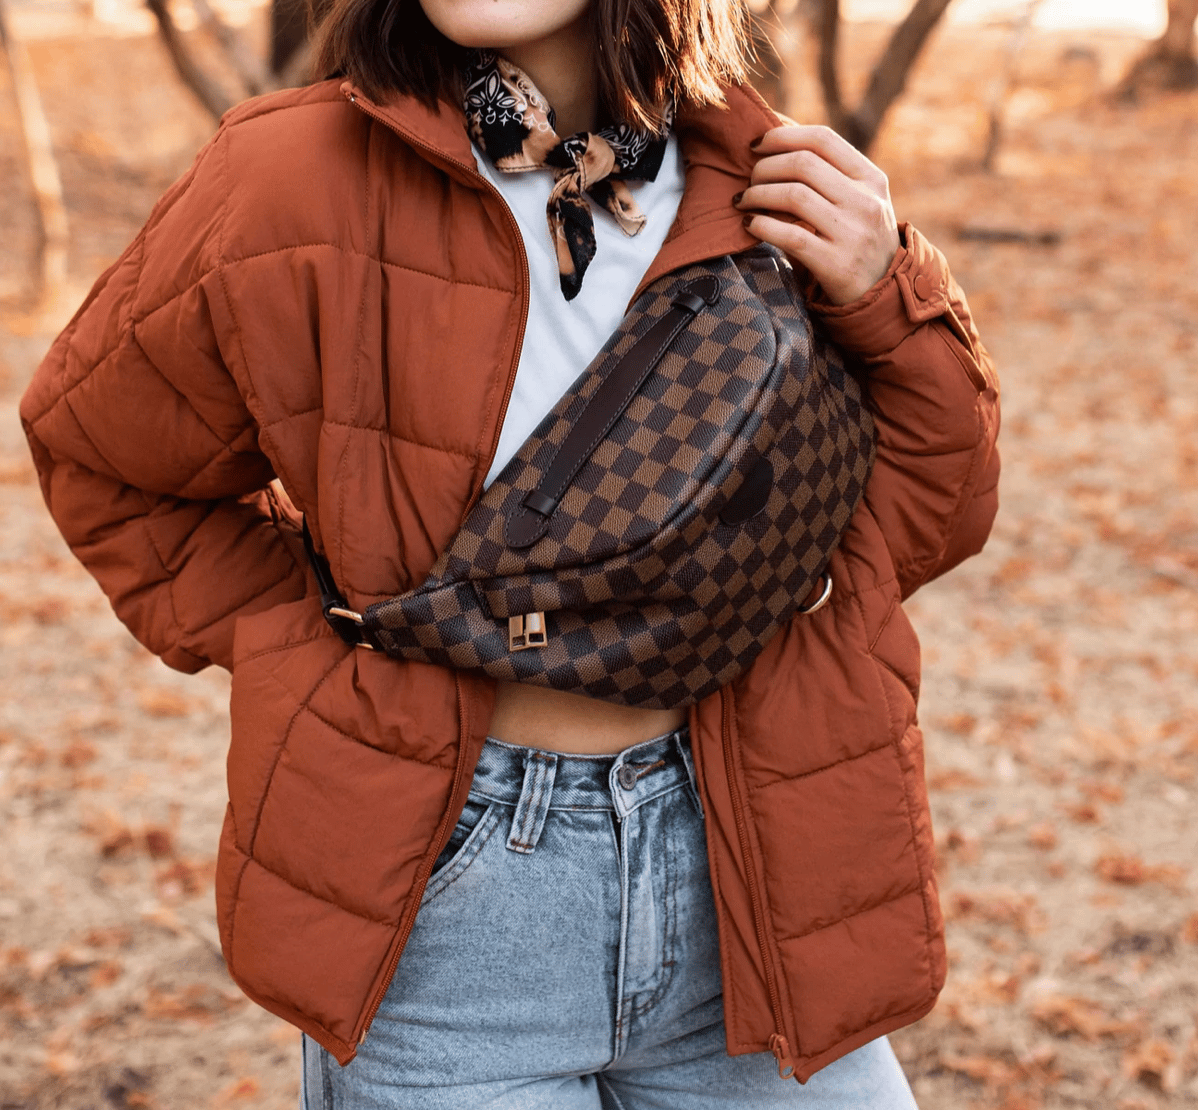 Luxury Brown/Black Checkered Fanny Pack